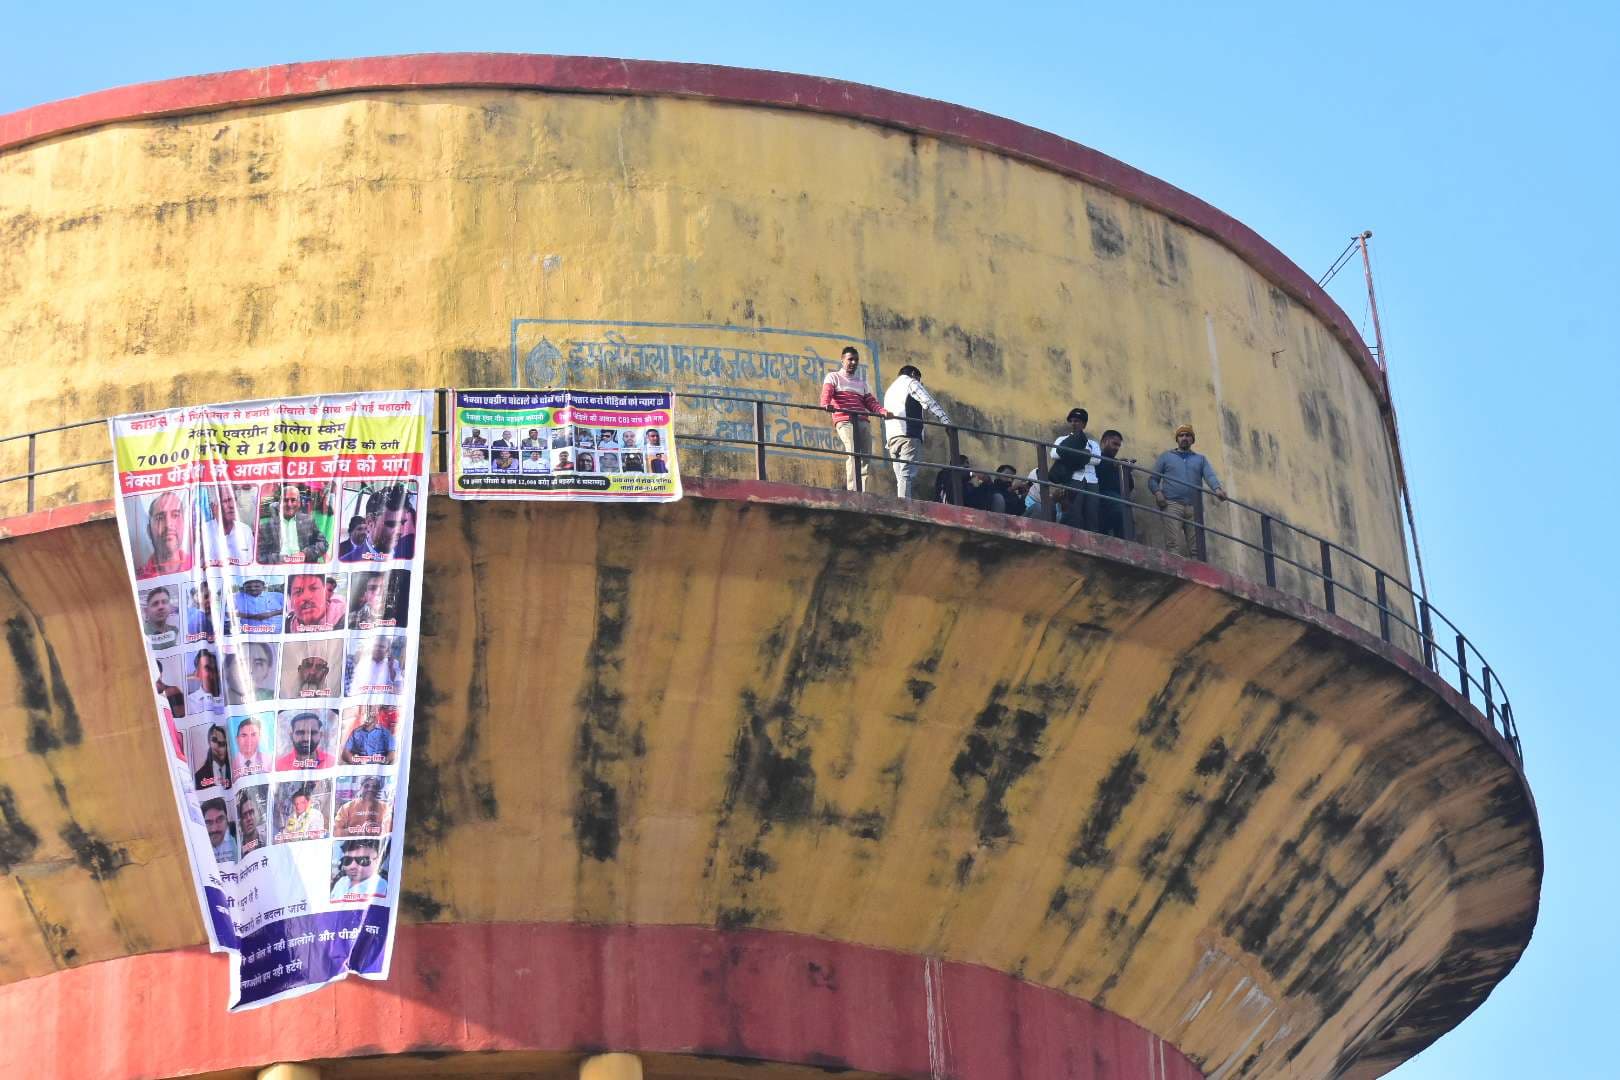 Case of fraud worth crores: Victims climbed on water tank